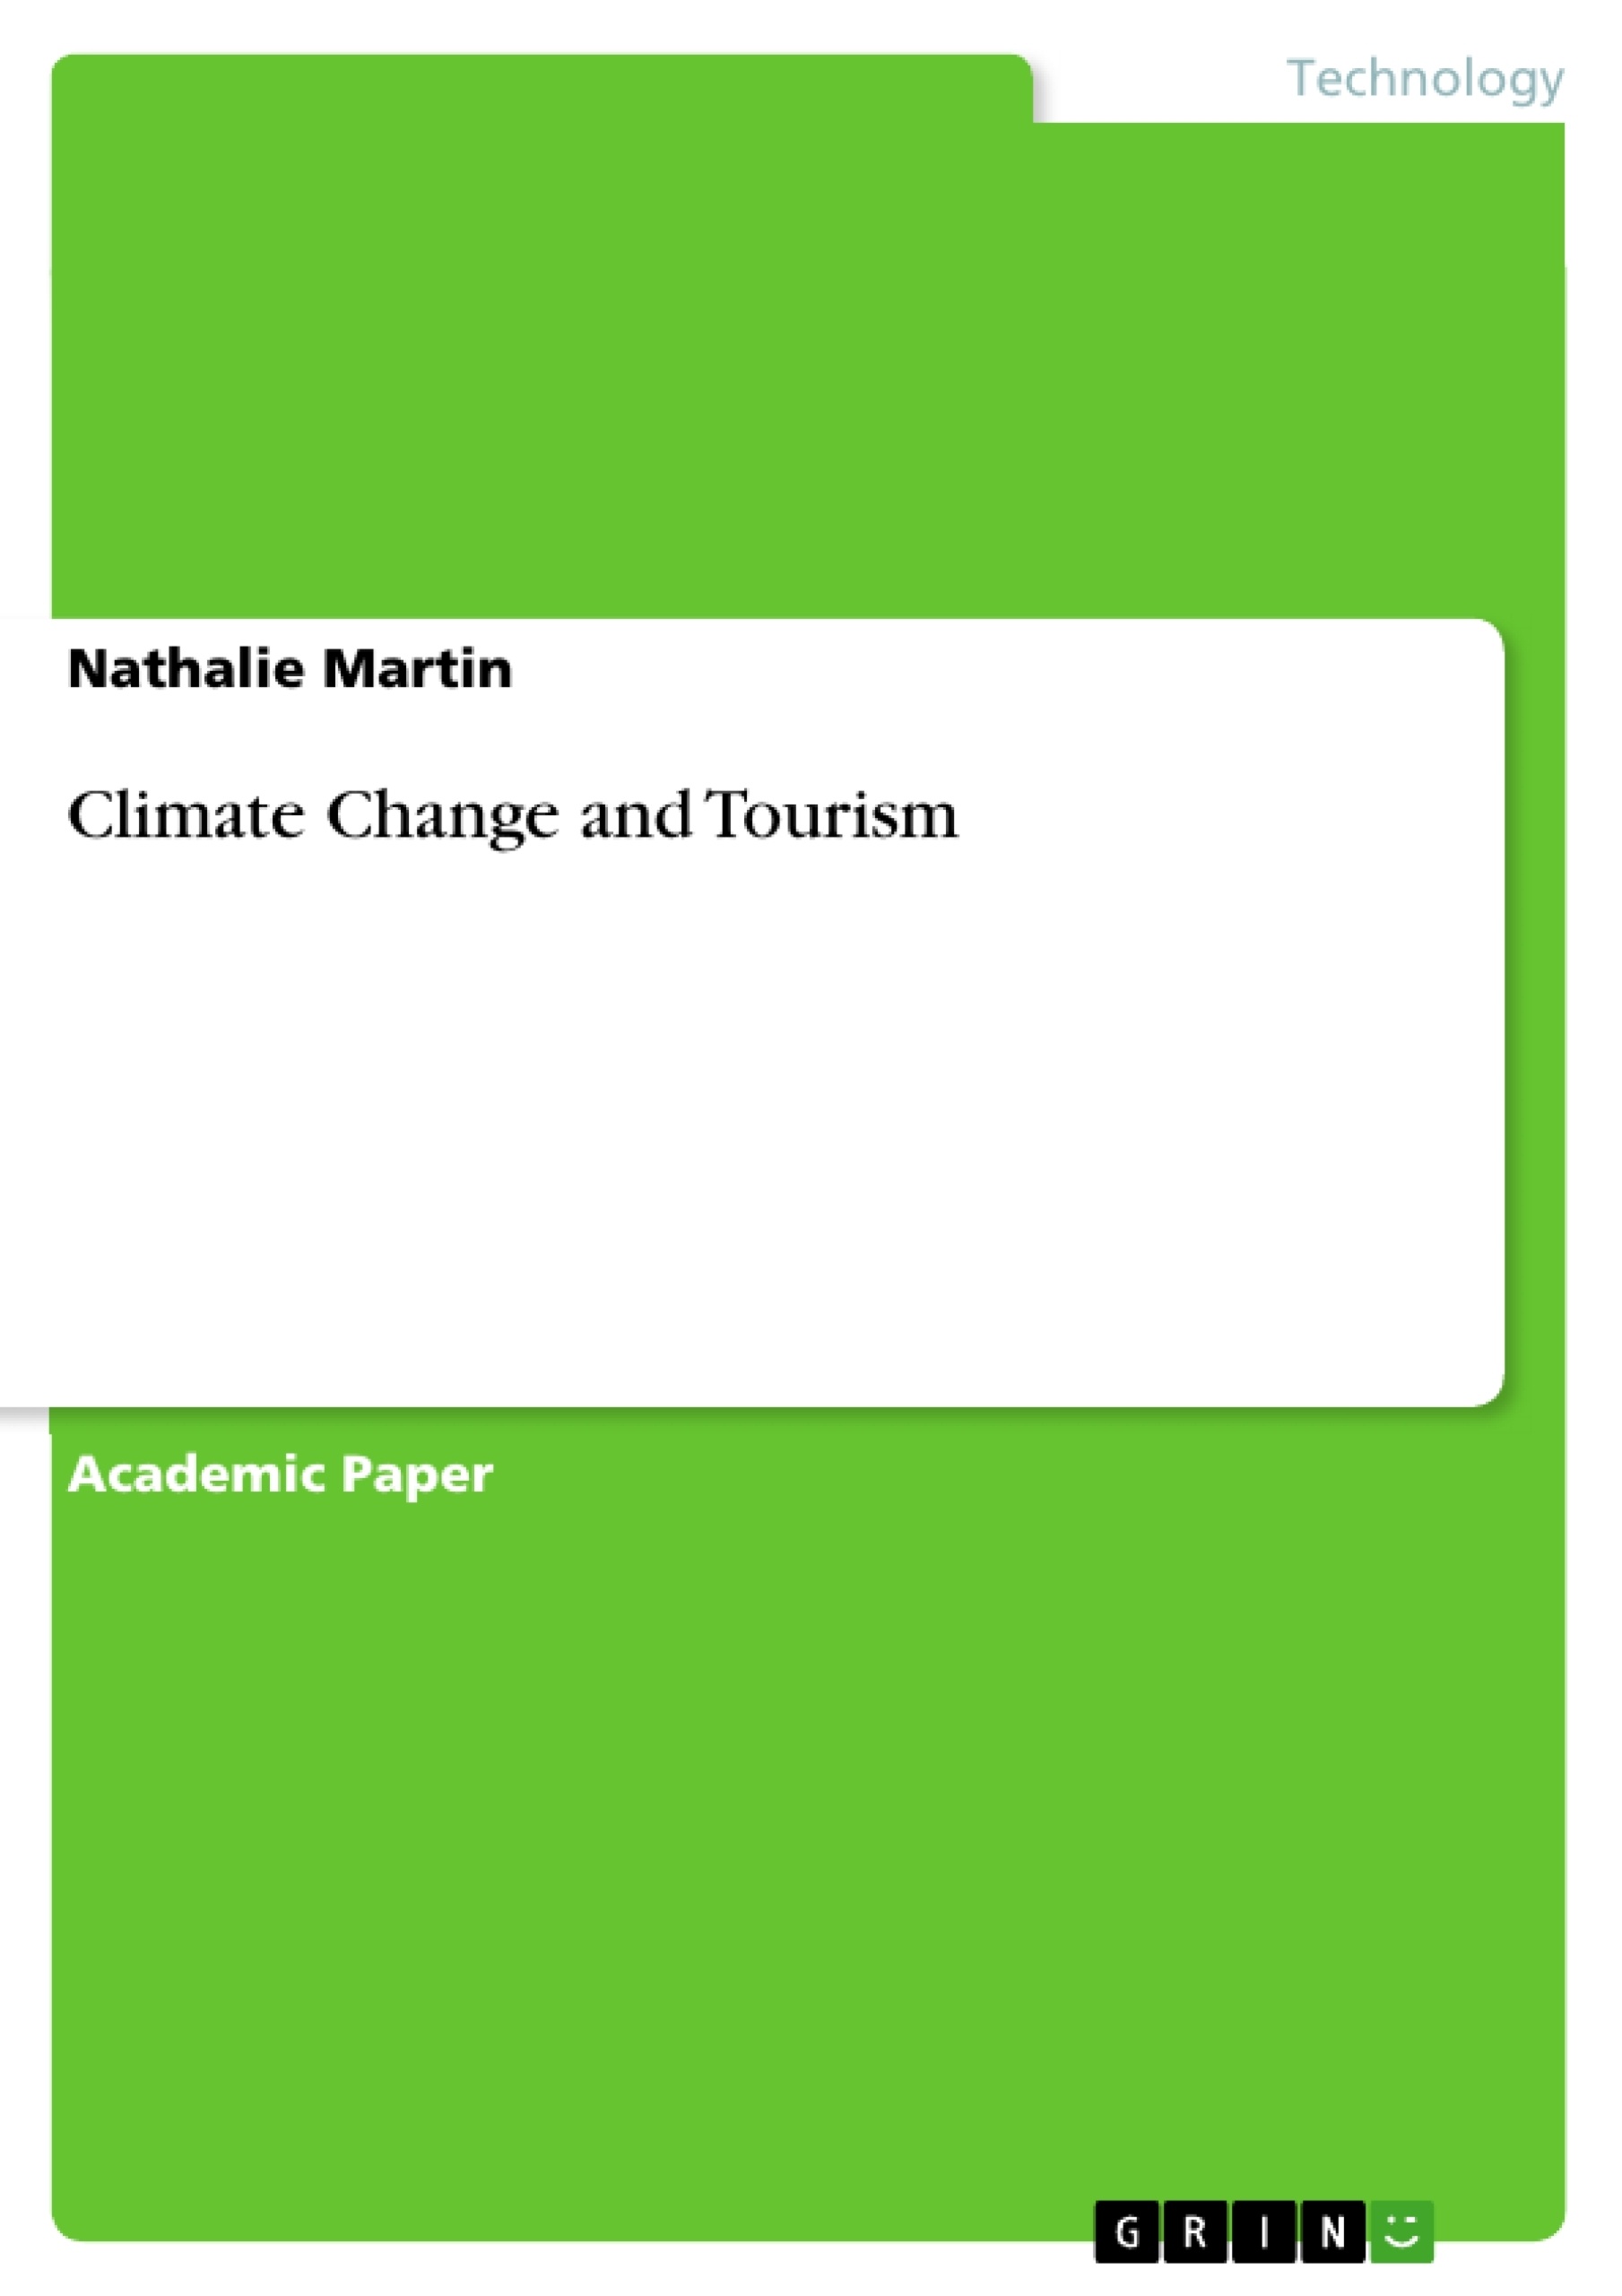 Title: Climate Change and Tourism